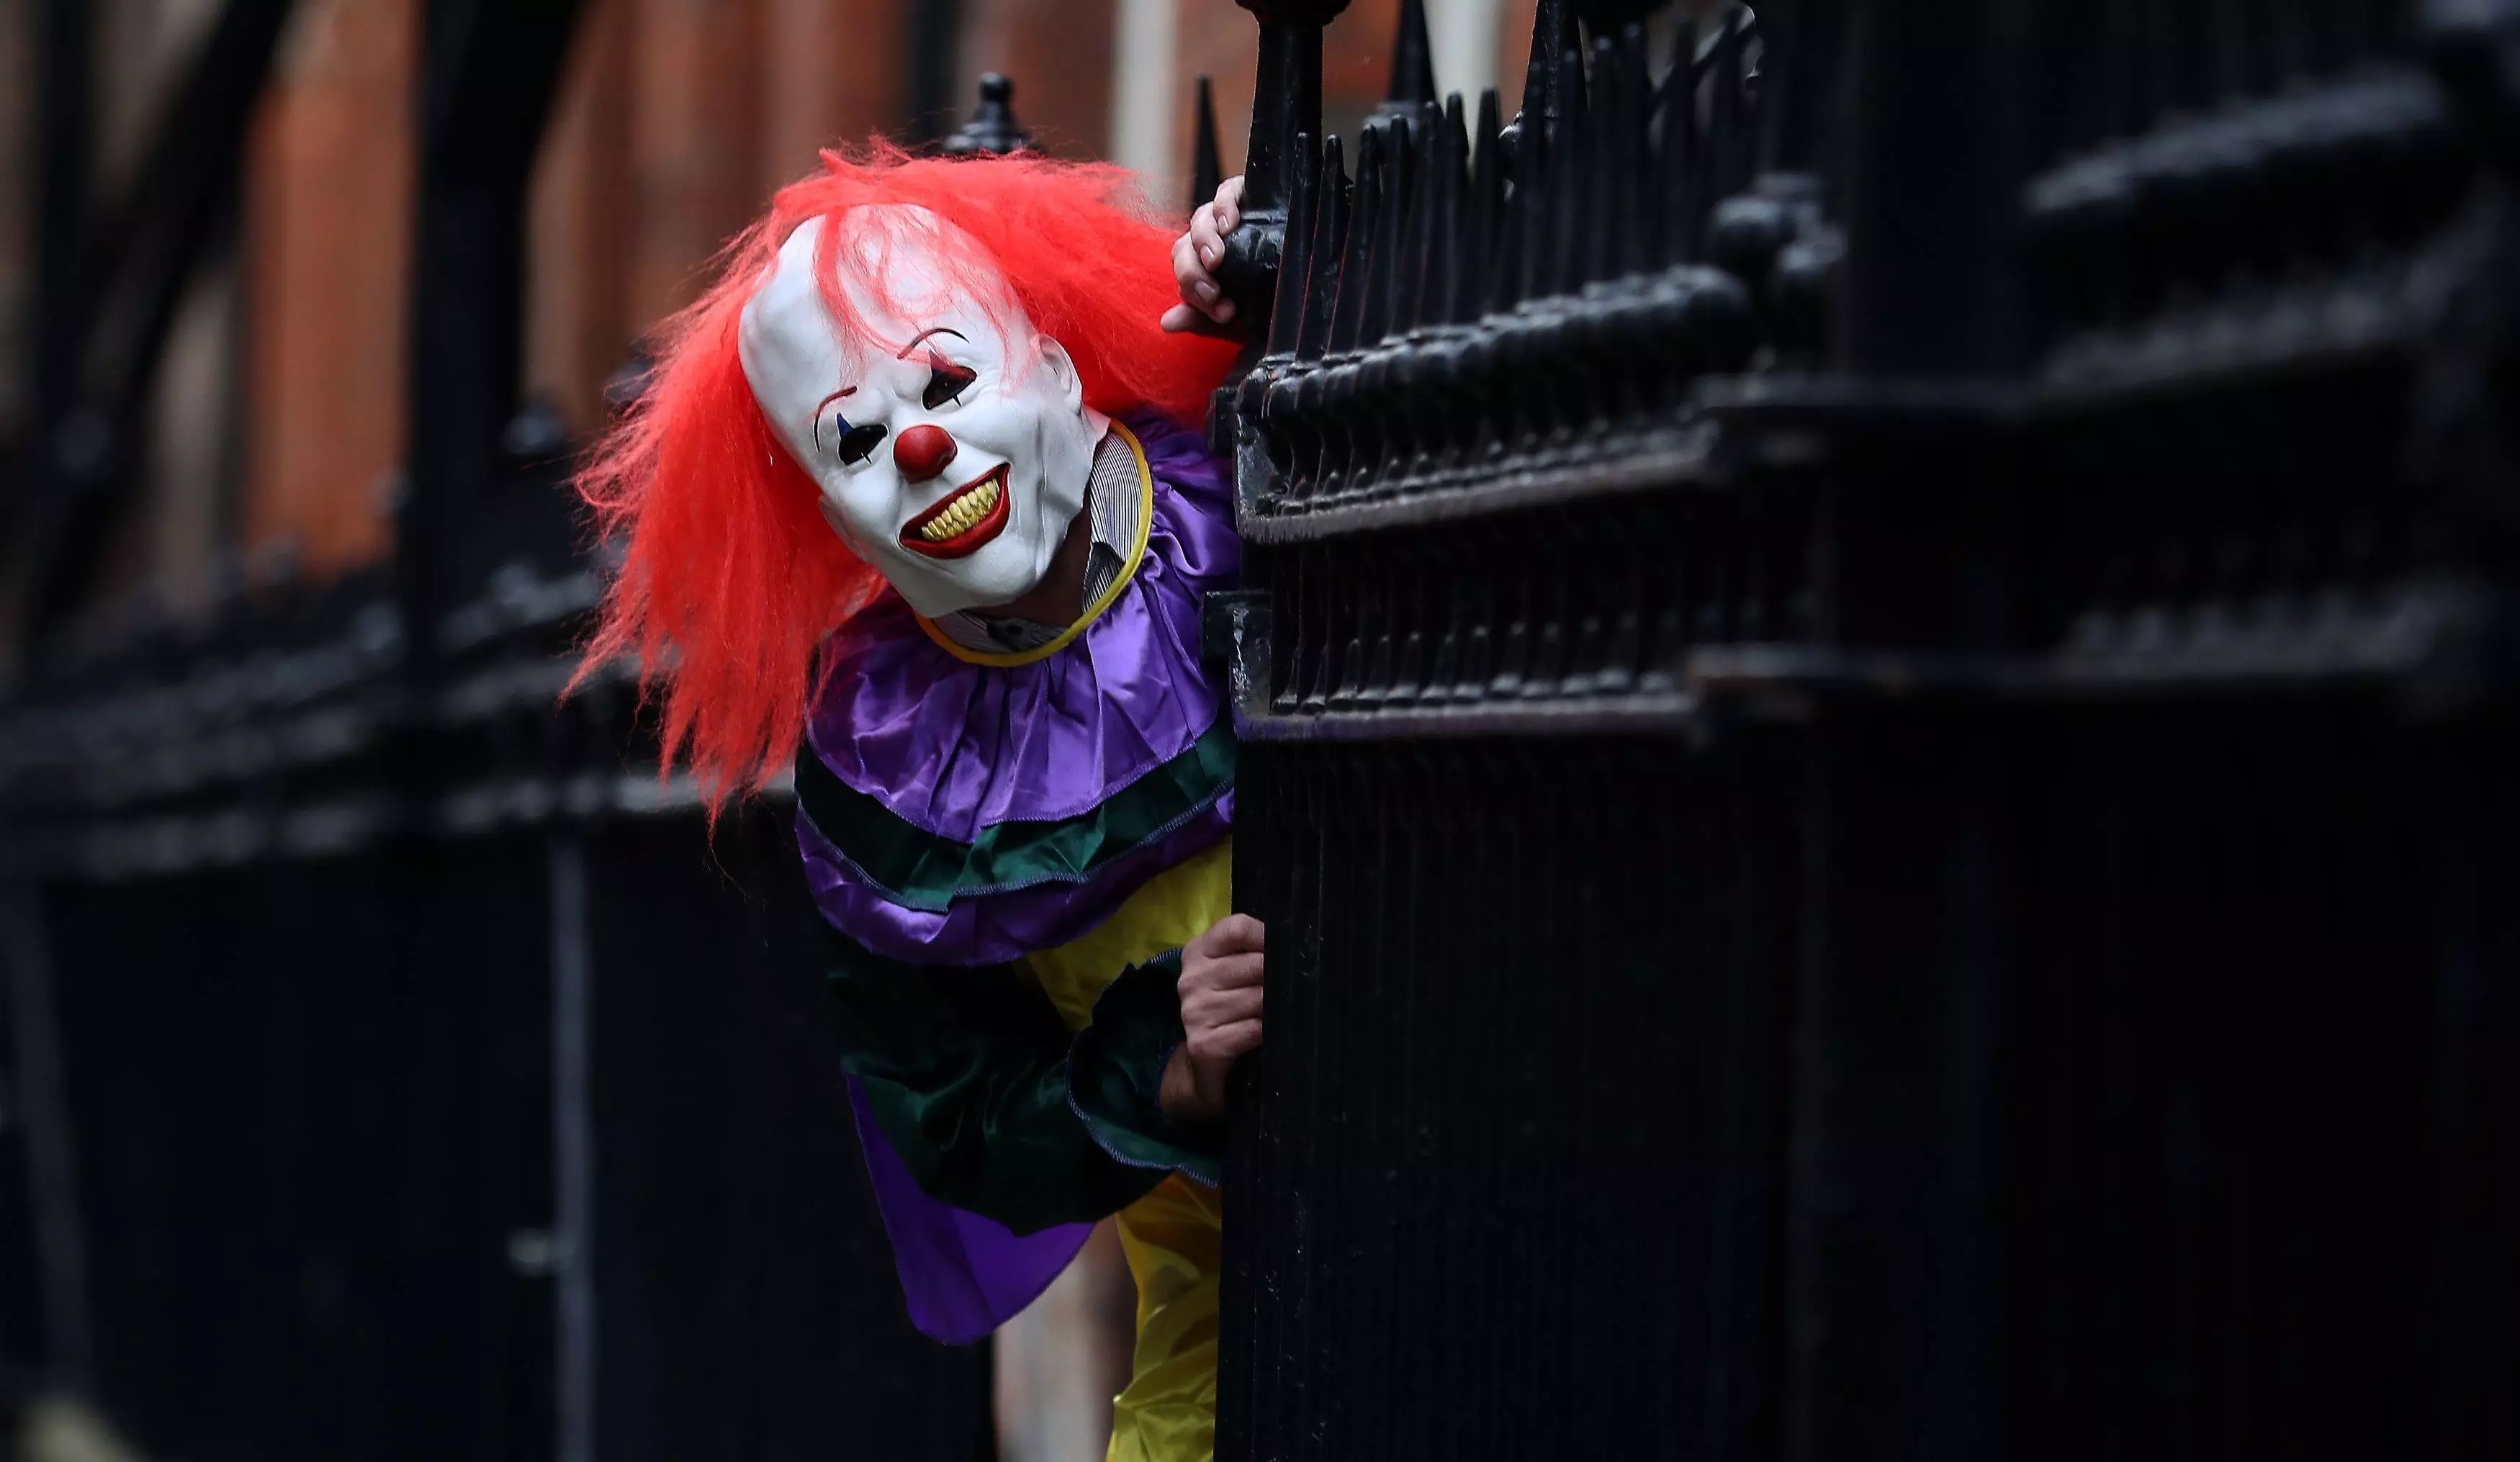 The man was allegedly dressed up as Stephen King's killer clown, Pennywise.